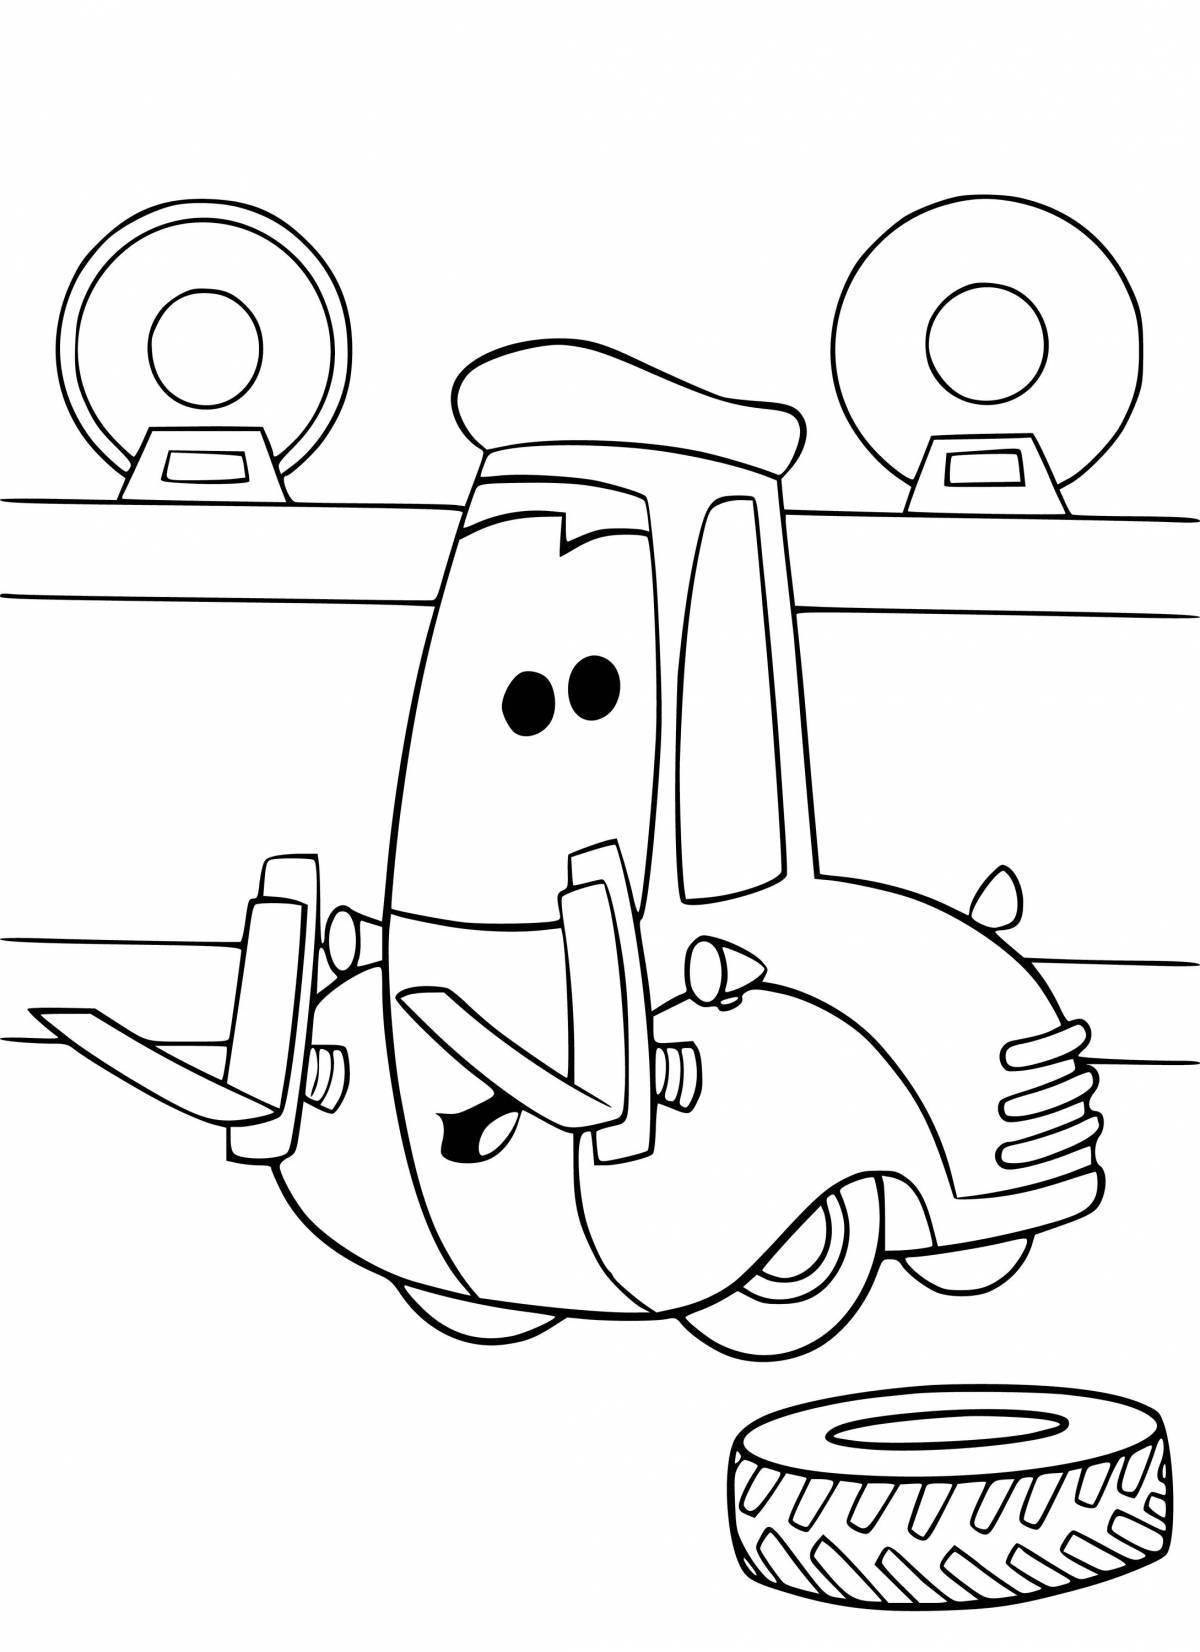 Left truck coloring page fun